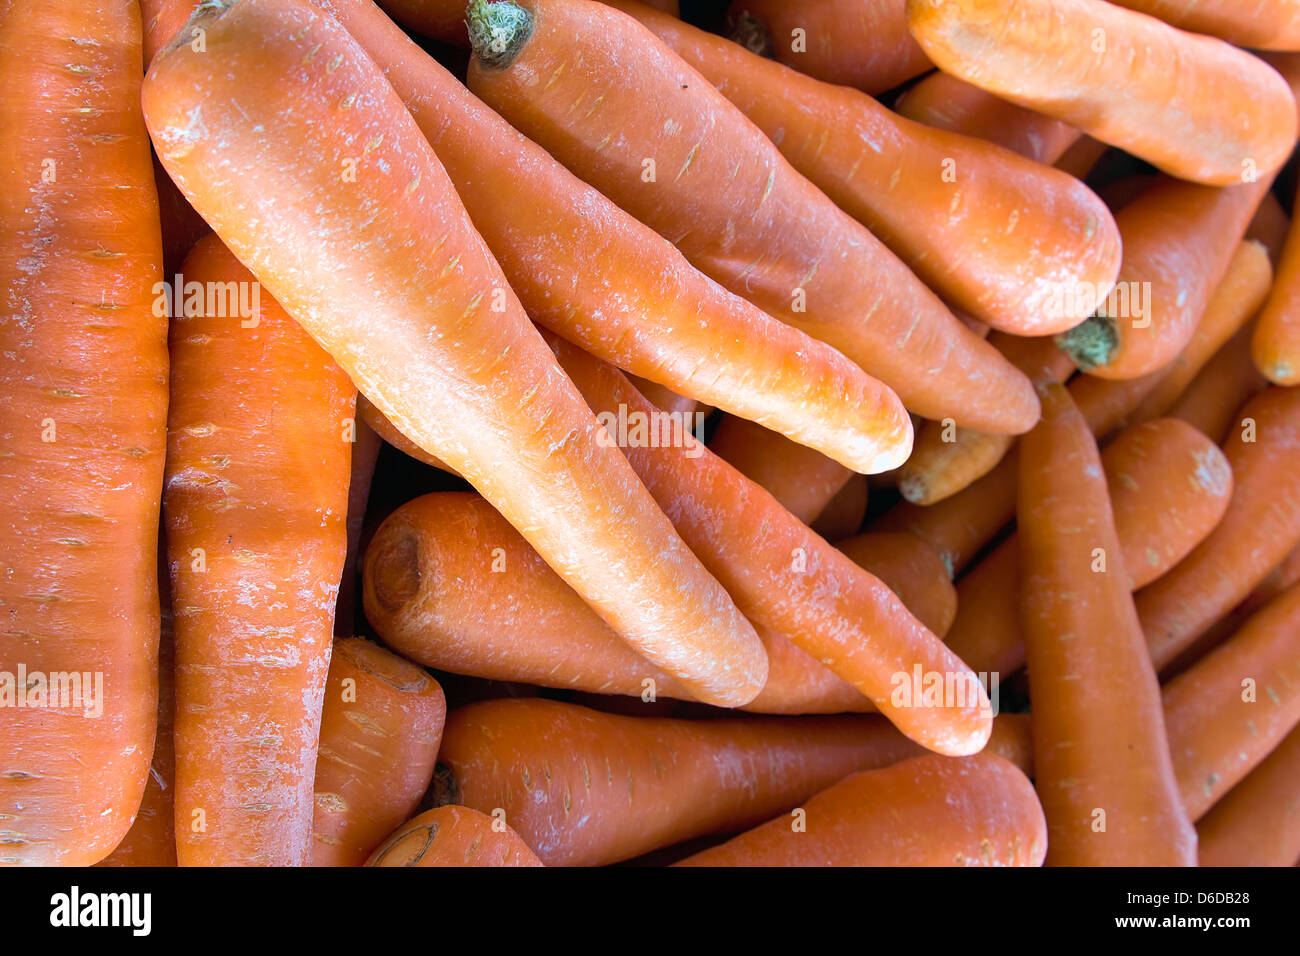 Carrots at Southeast Asia Outdoor Wet Market with Natural Lighting Closeup Background Stock Photo